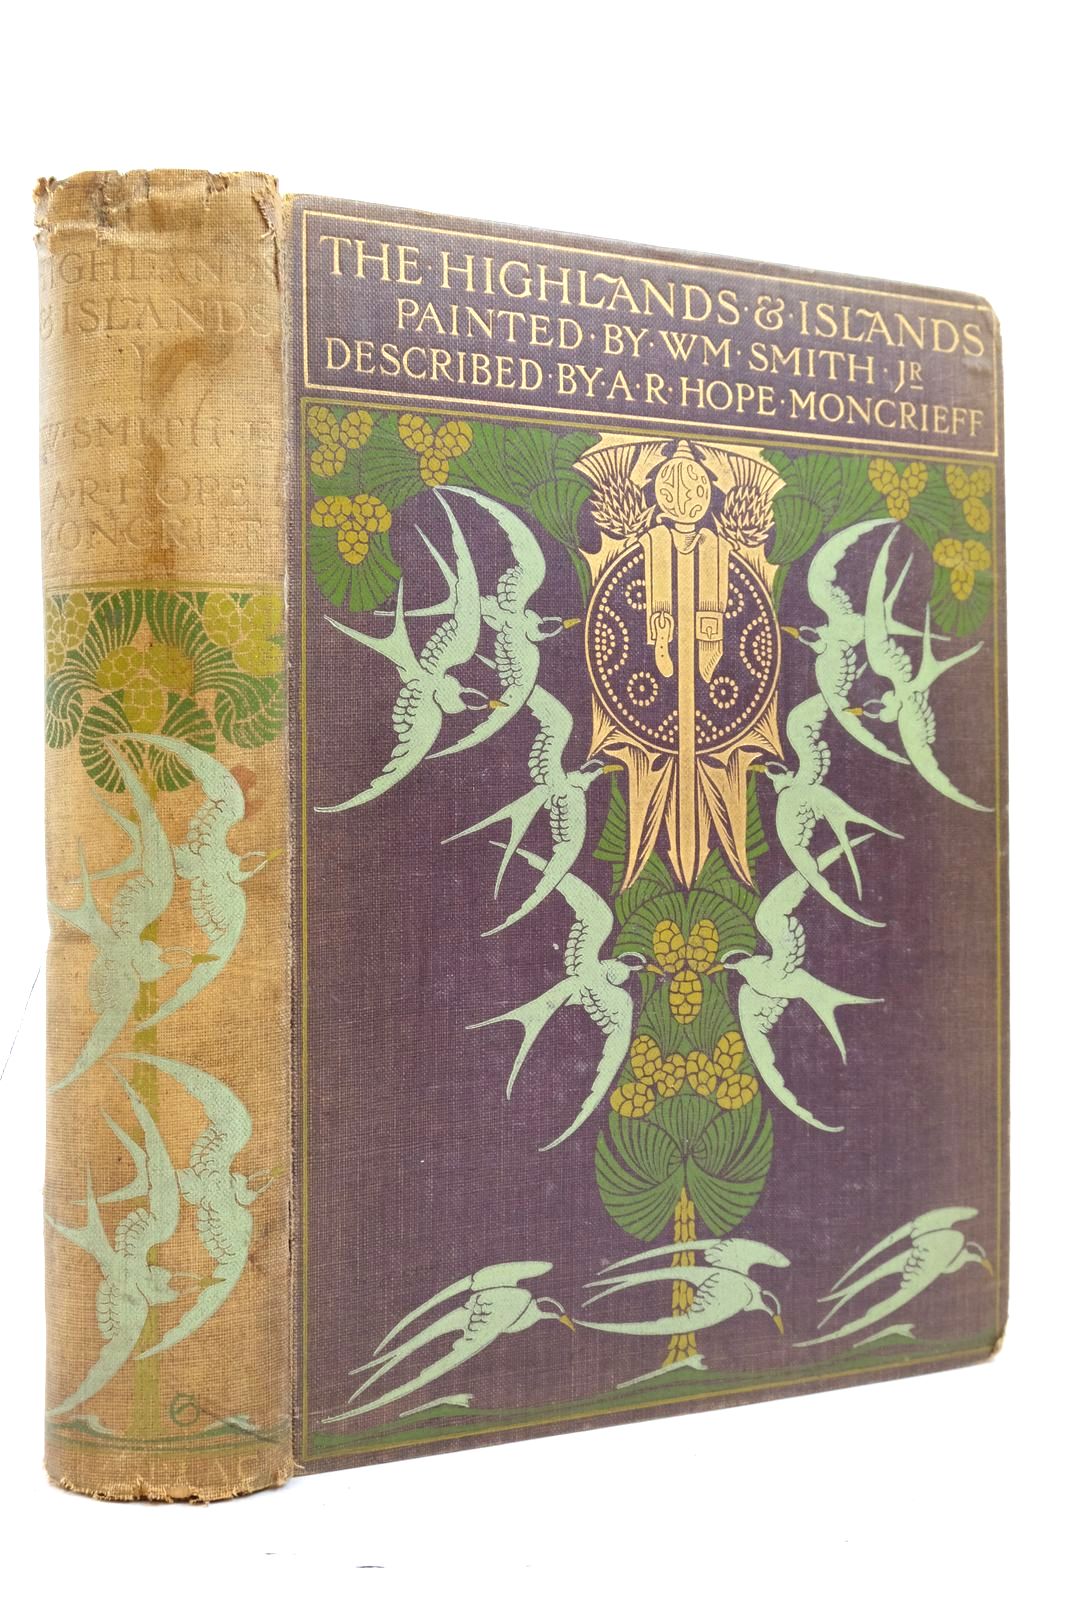 Photo of THE HIGHLANDS AND ISLANDS OF SCOTLAND written by Moncrieff, A.R. Hope illustrated by Smith, W. published by A. &amp; C. Black (STOCK CODE: 2137421)  for sale by Stella & Rose's Books